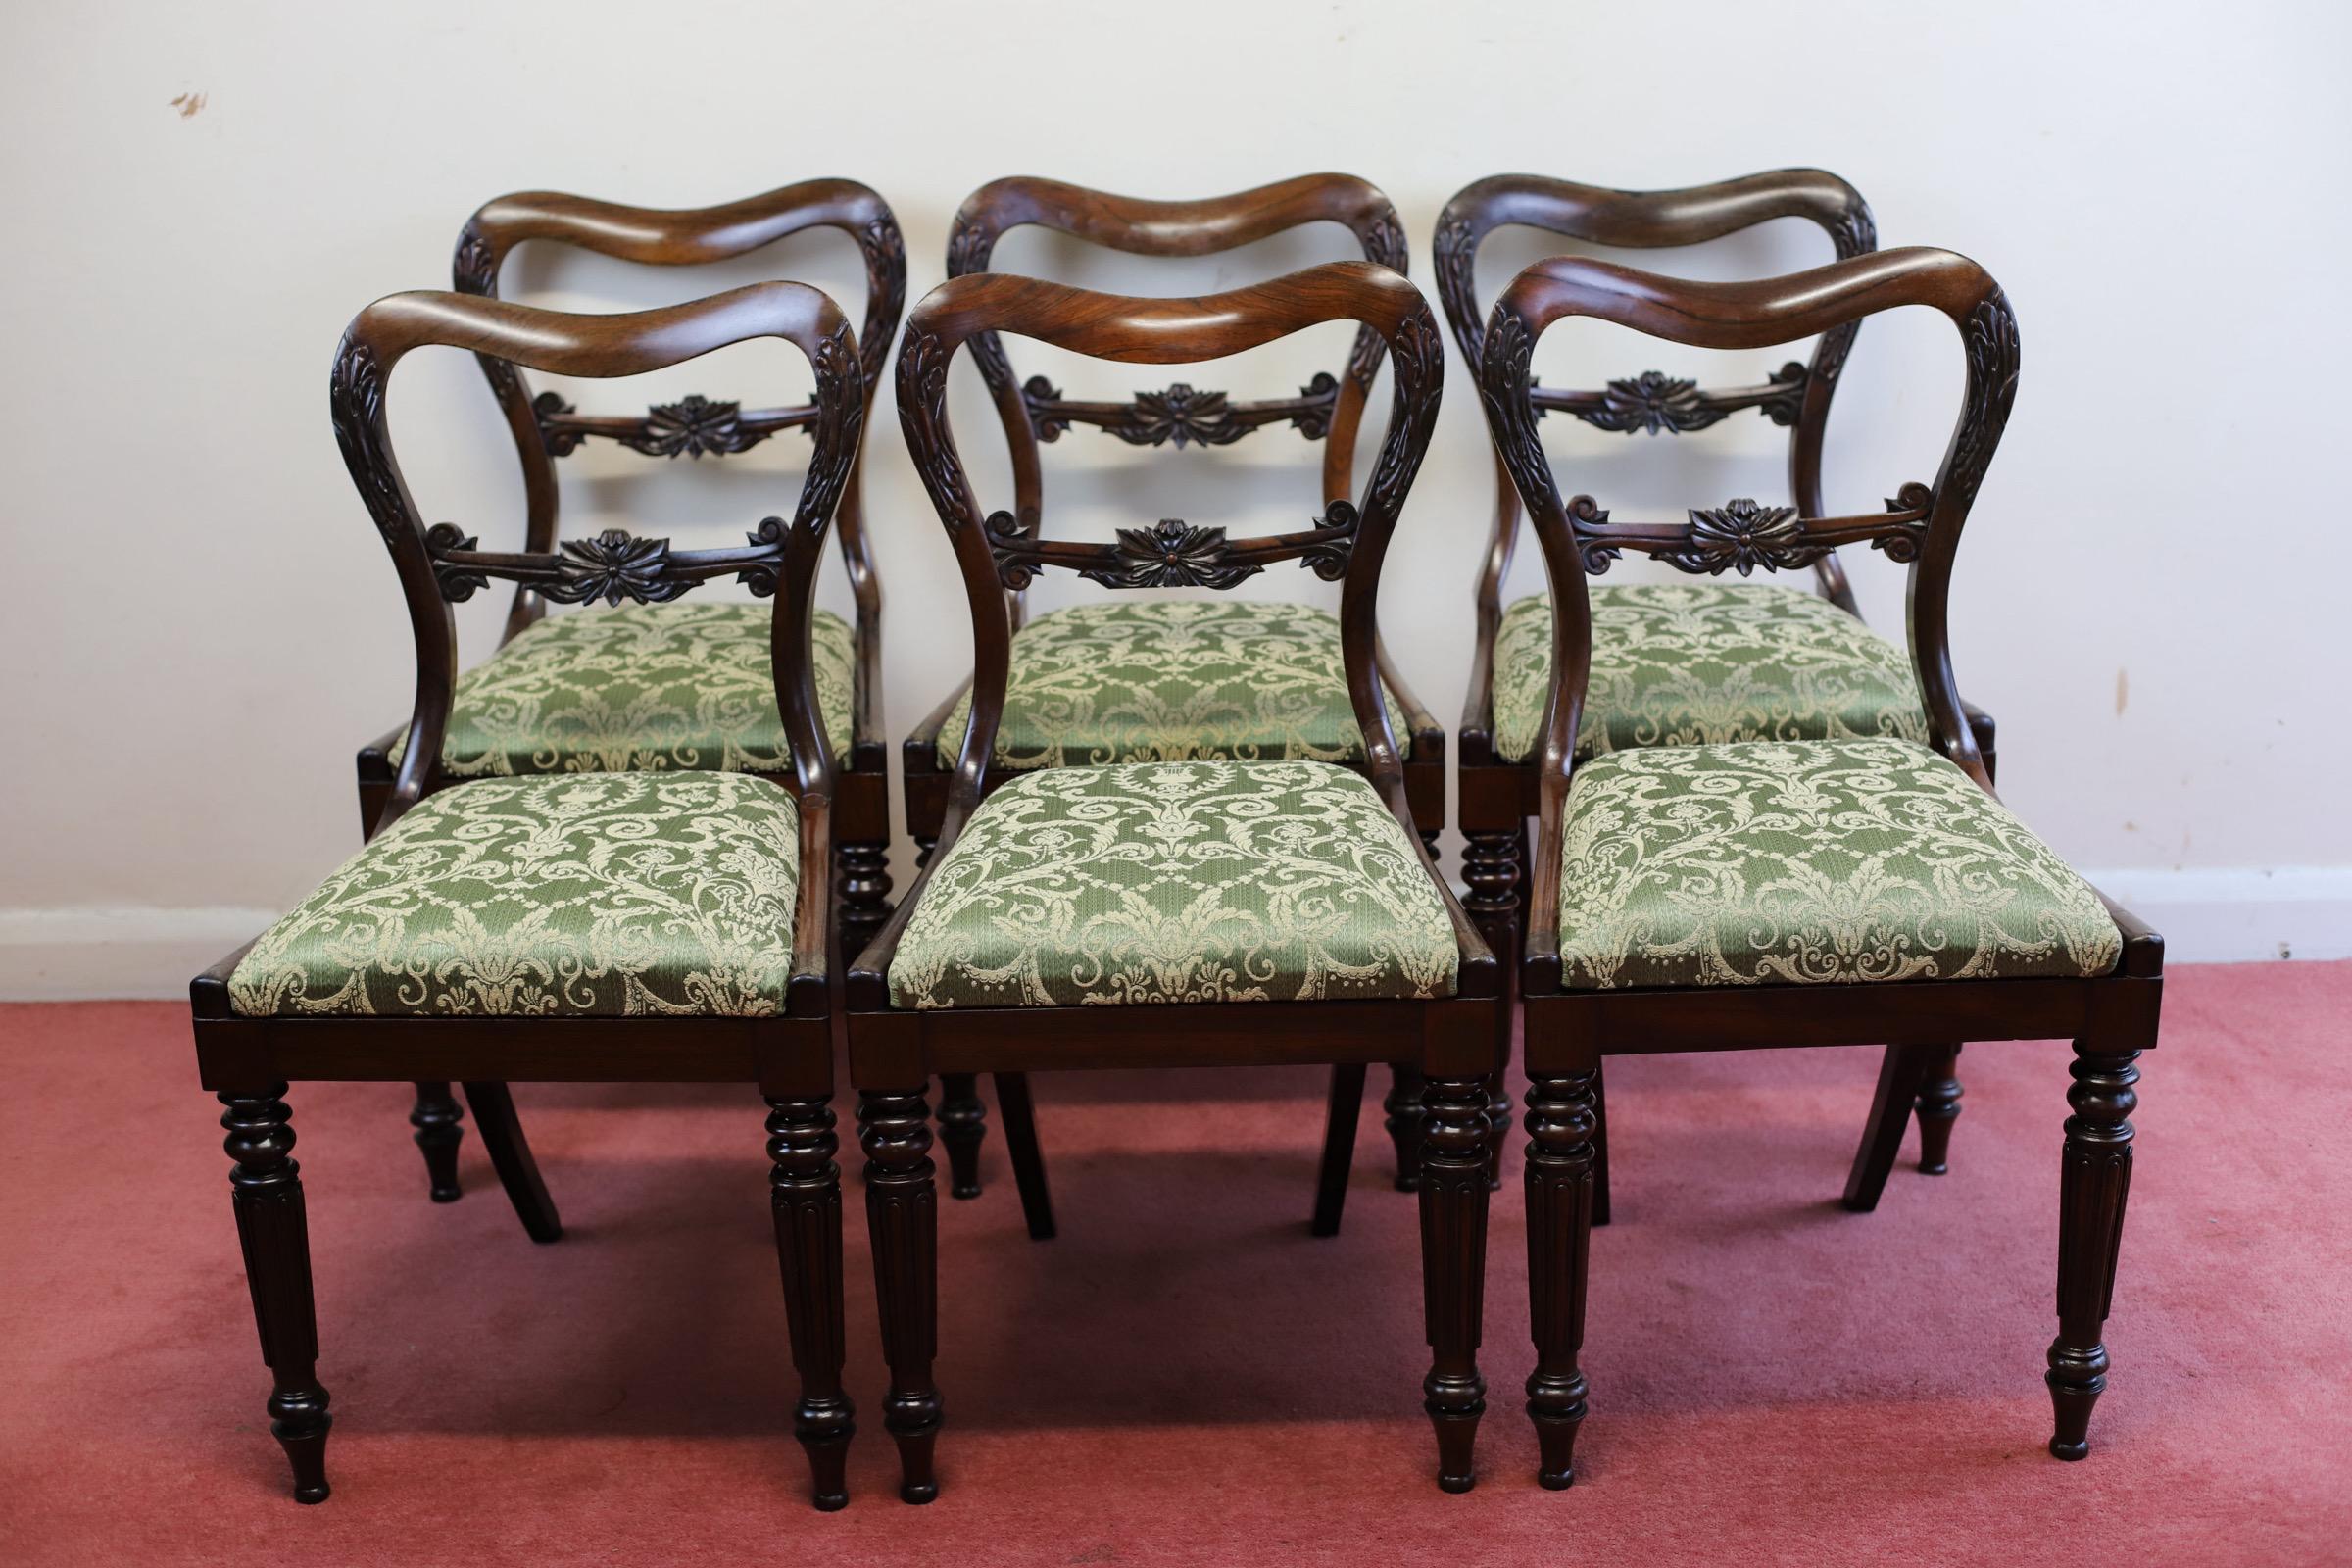 We delight to offer for sale this amazing early Victorian set of six rosewood dining chairs , with acanthus and floral carved open backs above drop-in seats, raised on turned and tapered reeded legs , circa 1830. 
Some repairs has been made in the